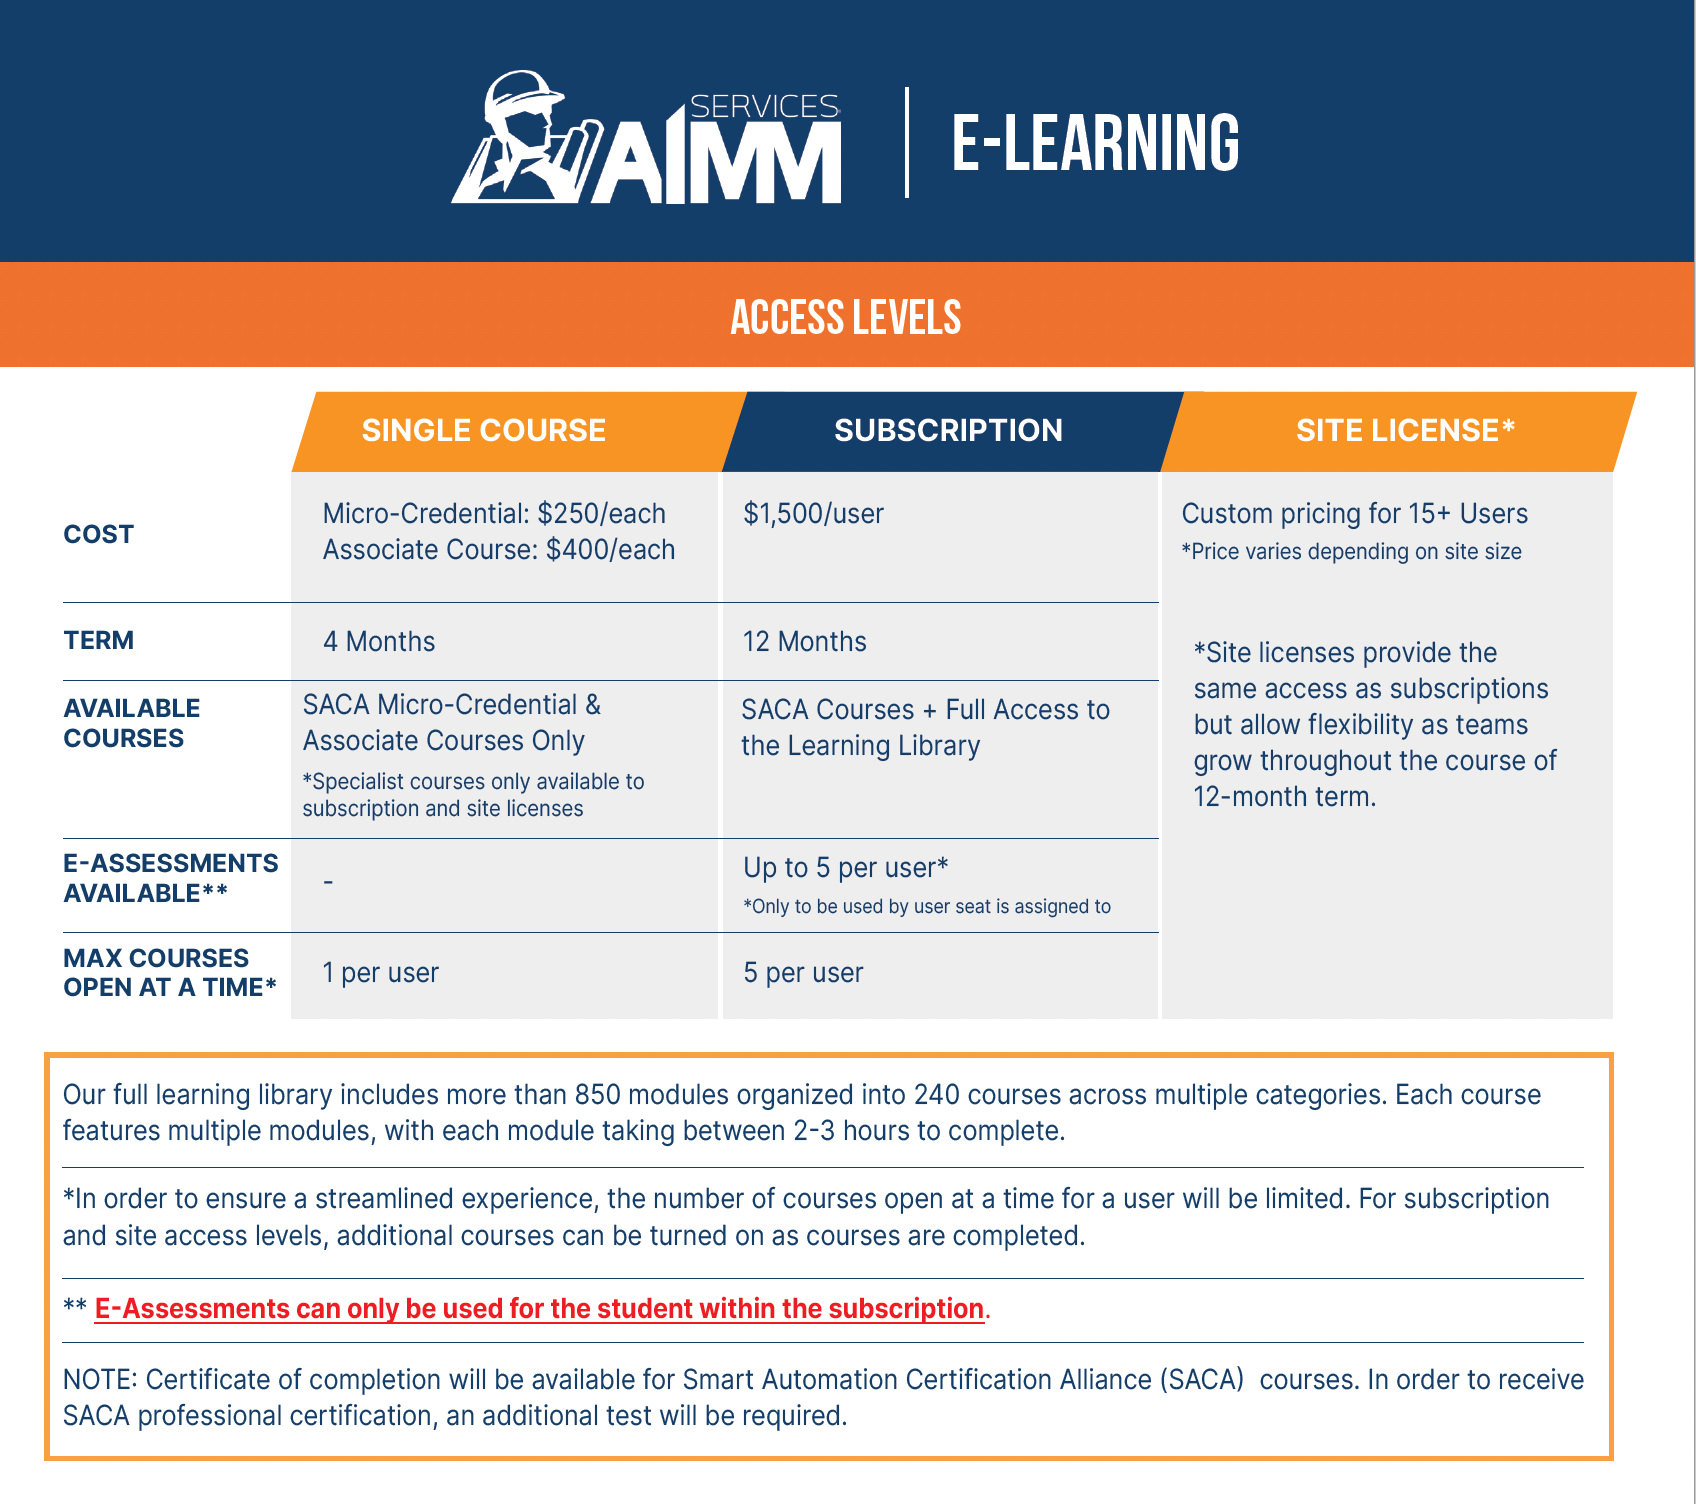 AIMM E-Learning access level graphic